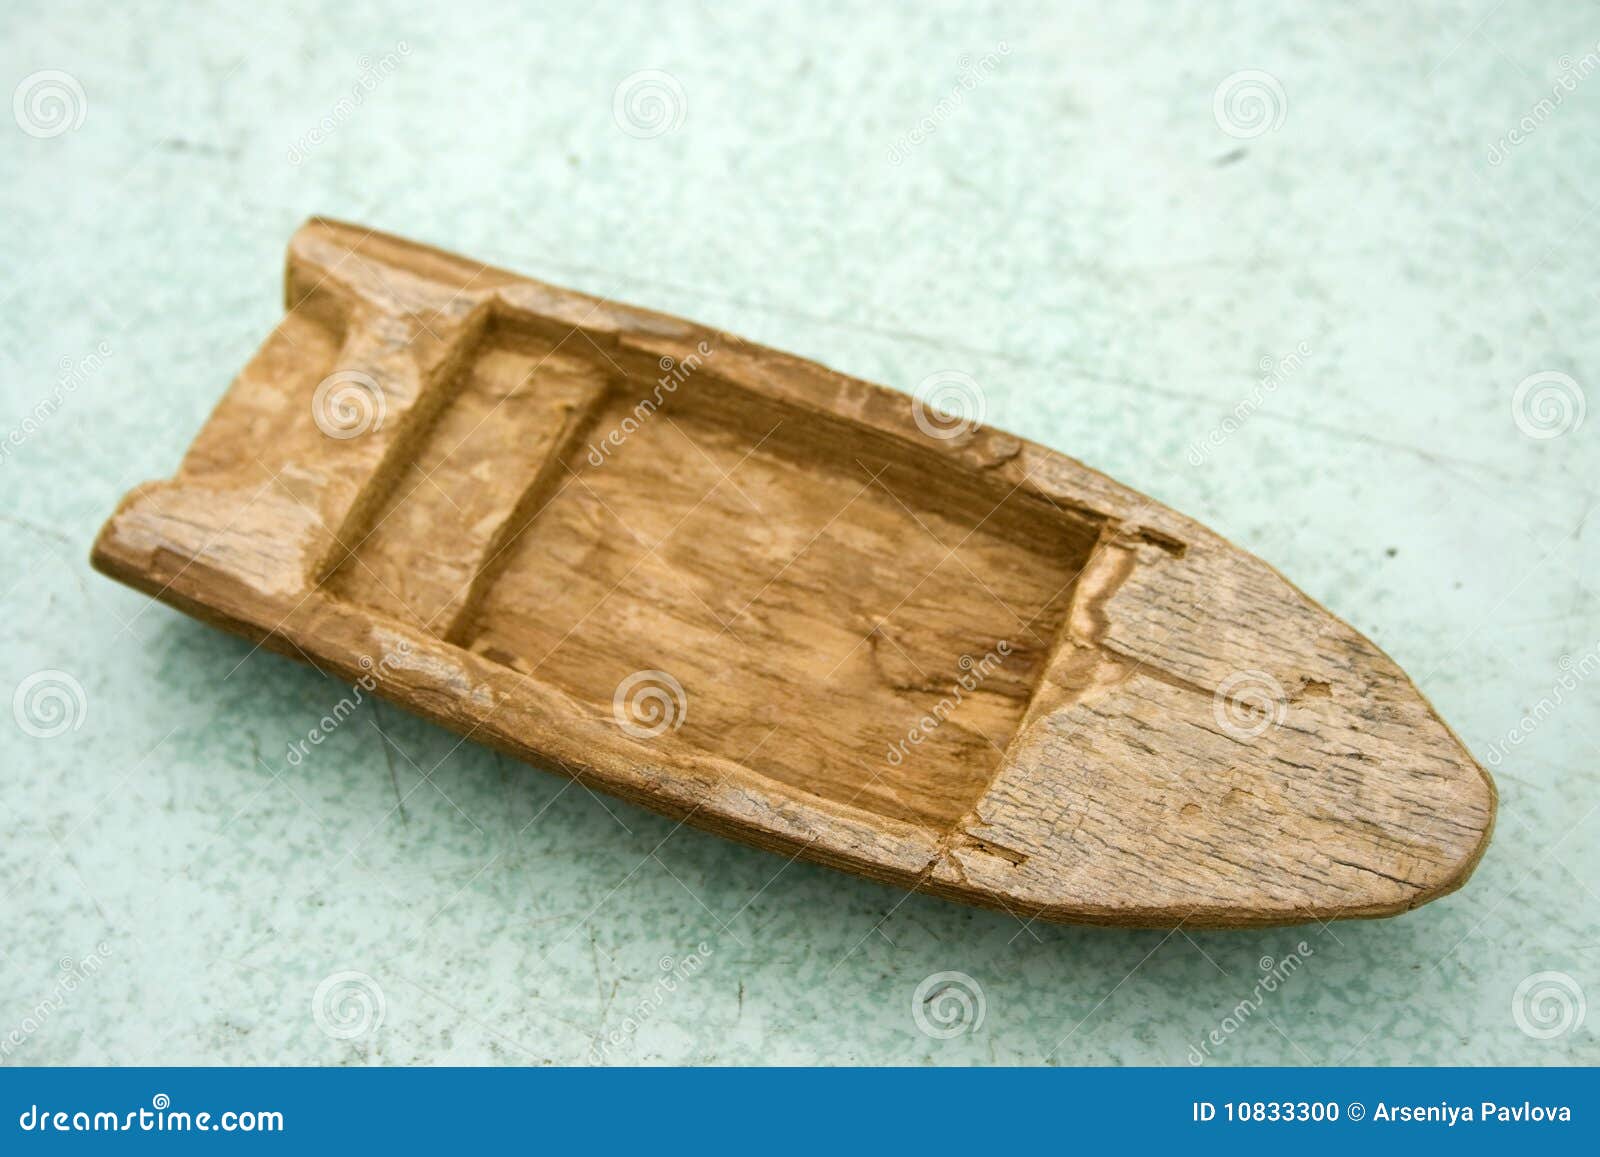 Old wooden toy boat stock photo. Image of small, wood 